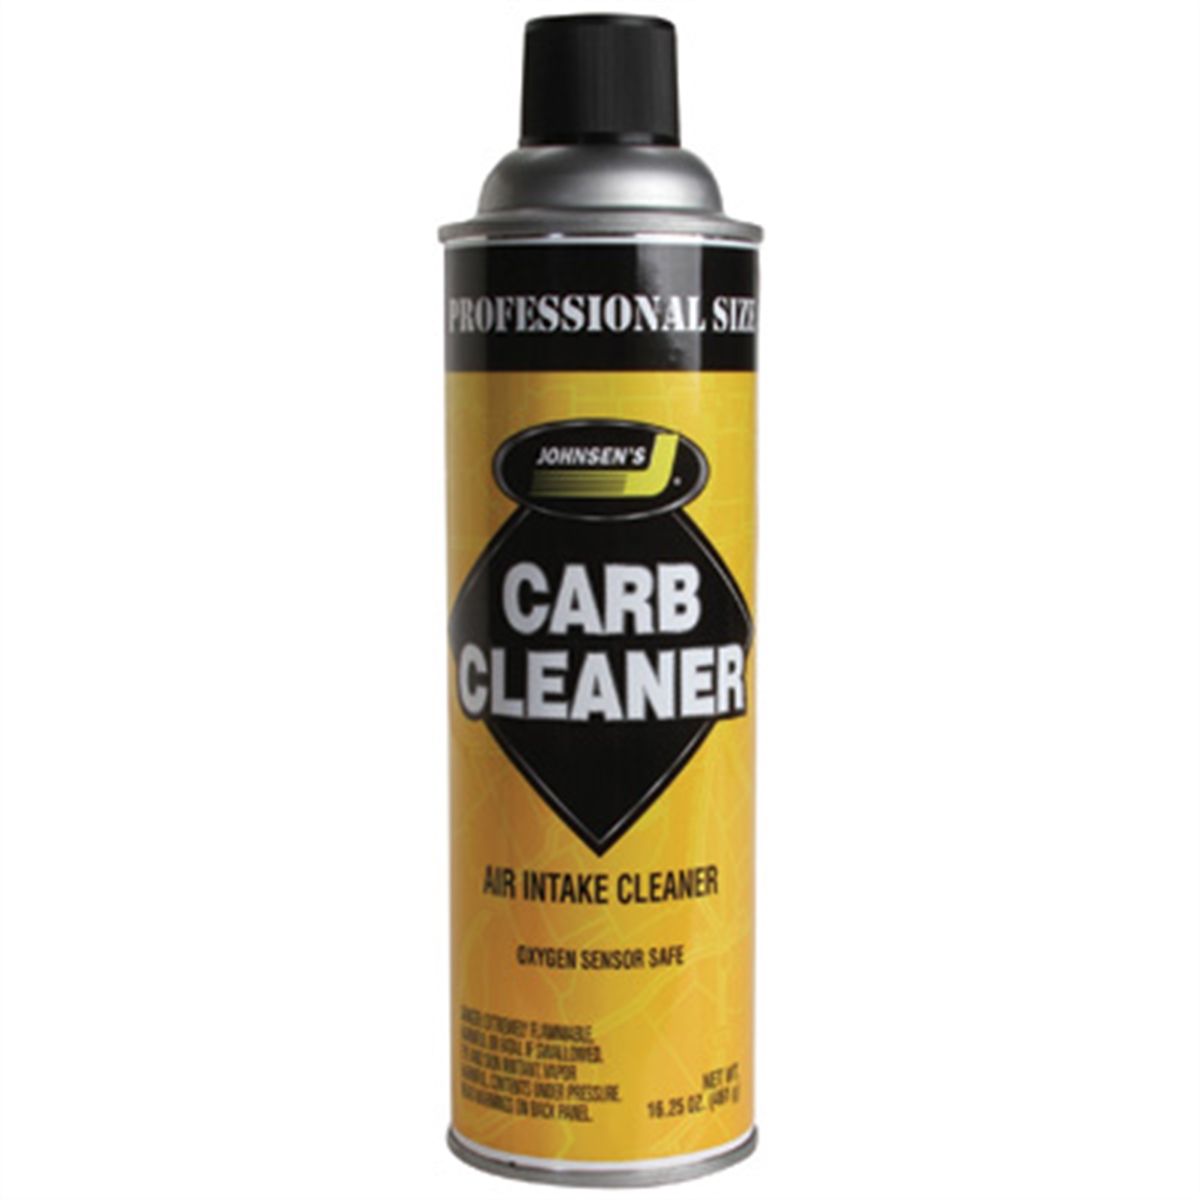 Johnsen's 4723 Chain and Cable Lube - 10 oz. (Pack of 12) - EXD Supply